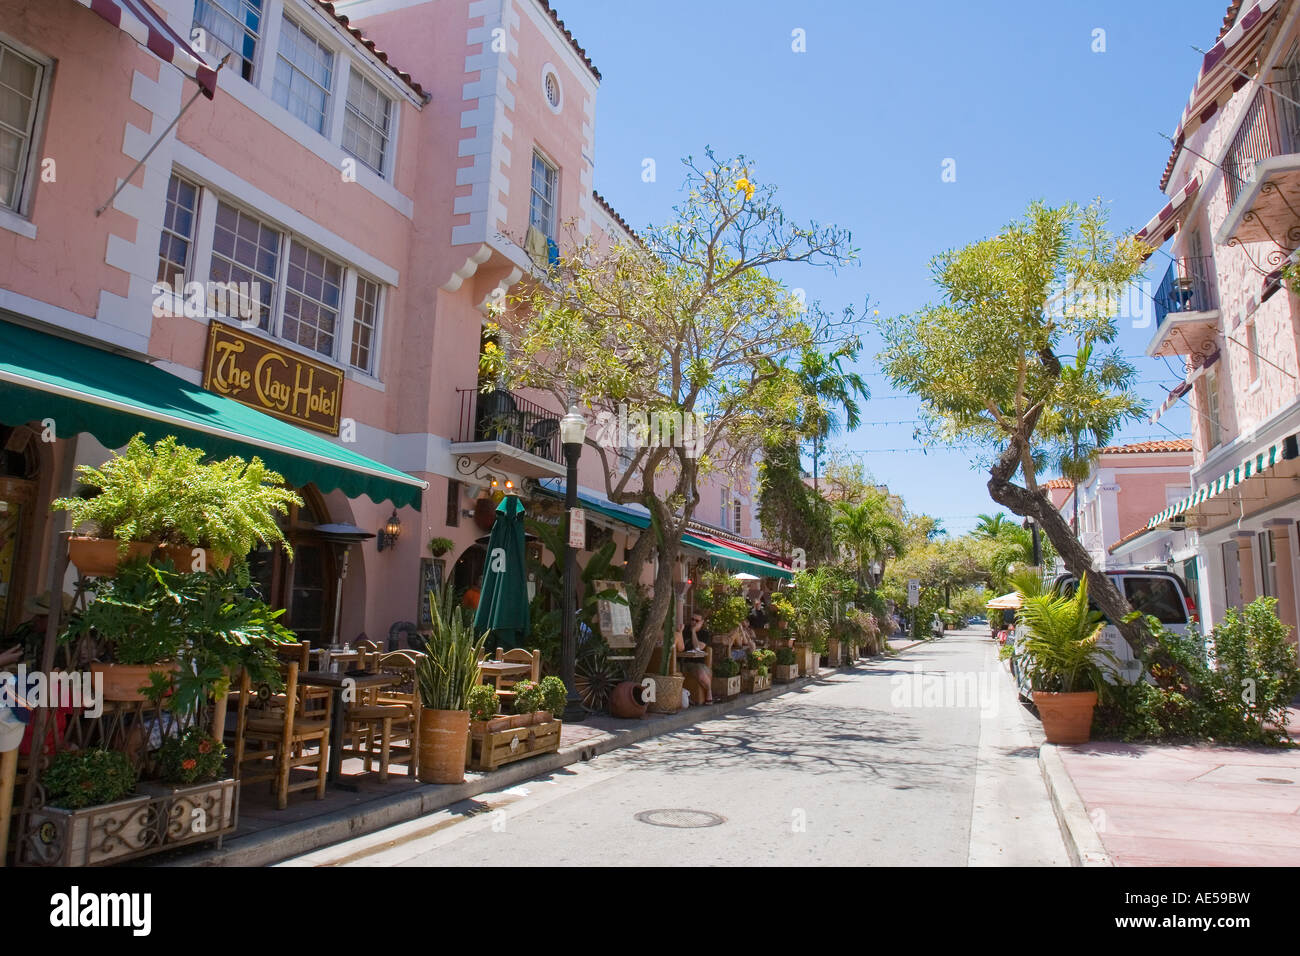 Restaurants hotels and shops on Espanola Way, a Mediterranean style street in South Beach Miami Stock Photo